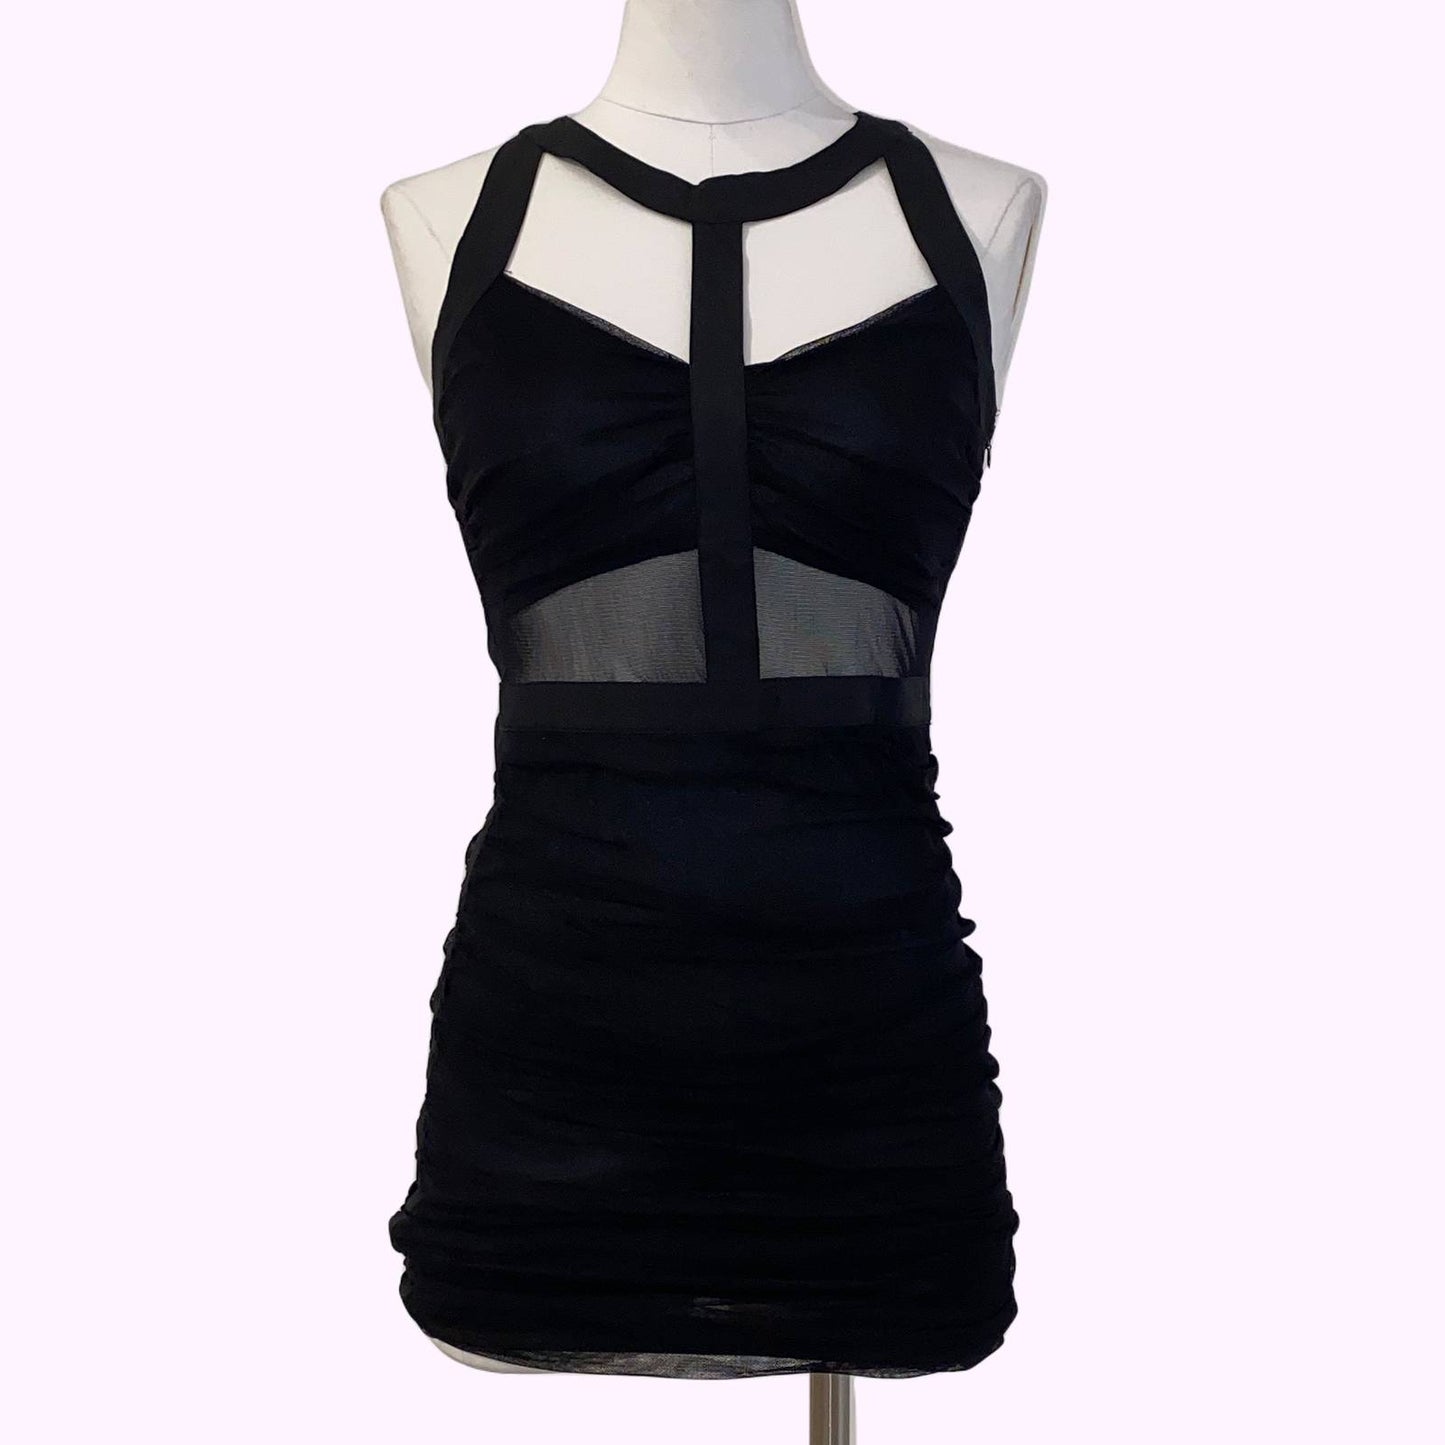 LOVEY DOVEY Black Bodycon Cut Out Dress with Mesh Details